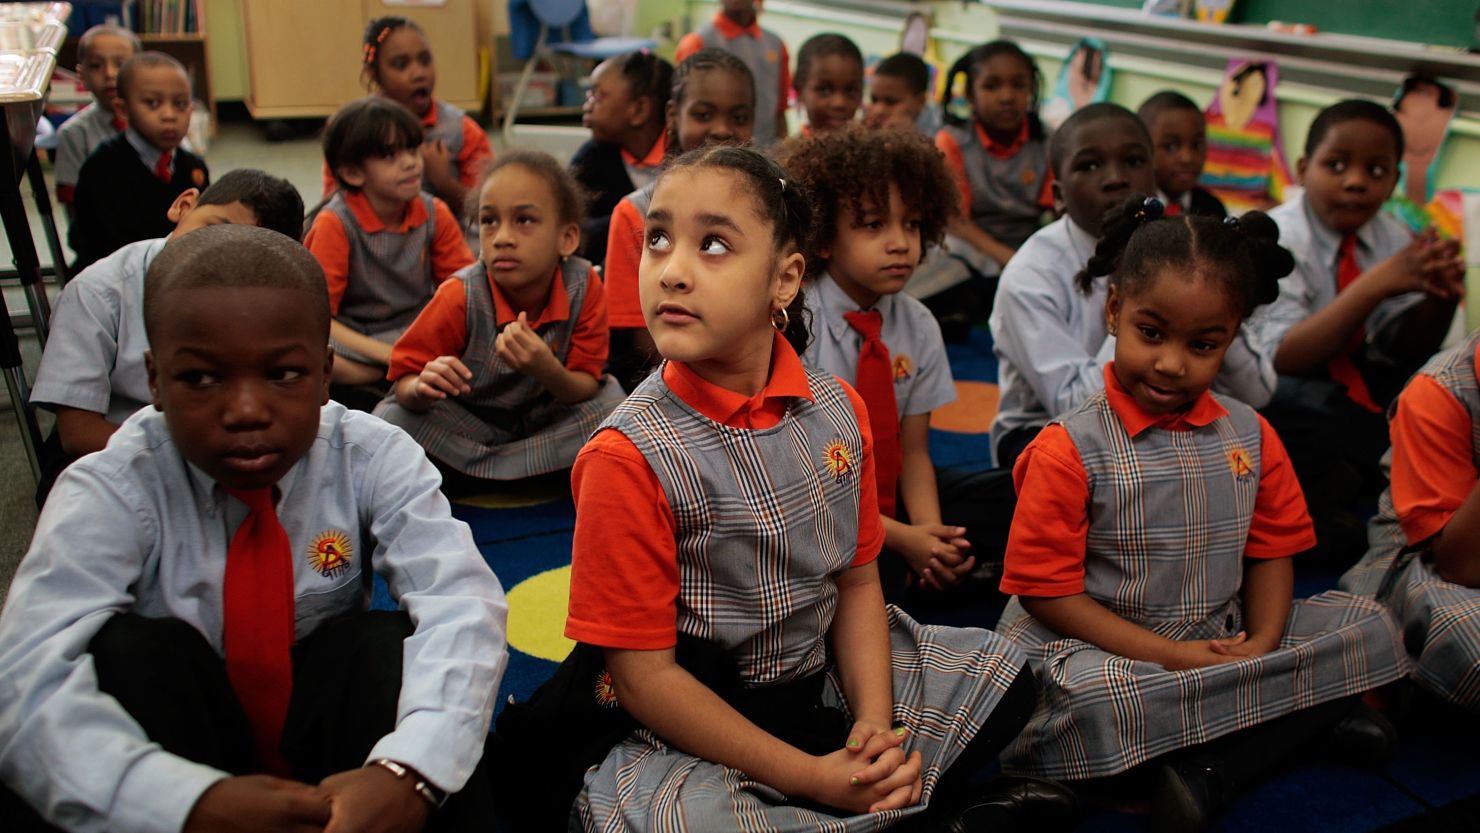 Students sit patiently at Harlem Success School, praised in the book "Class Warfare" as a high-achieving charter school.